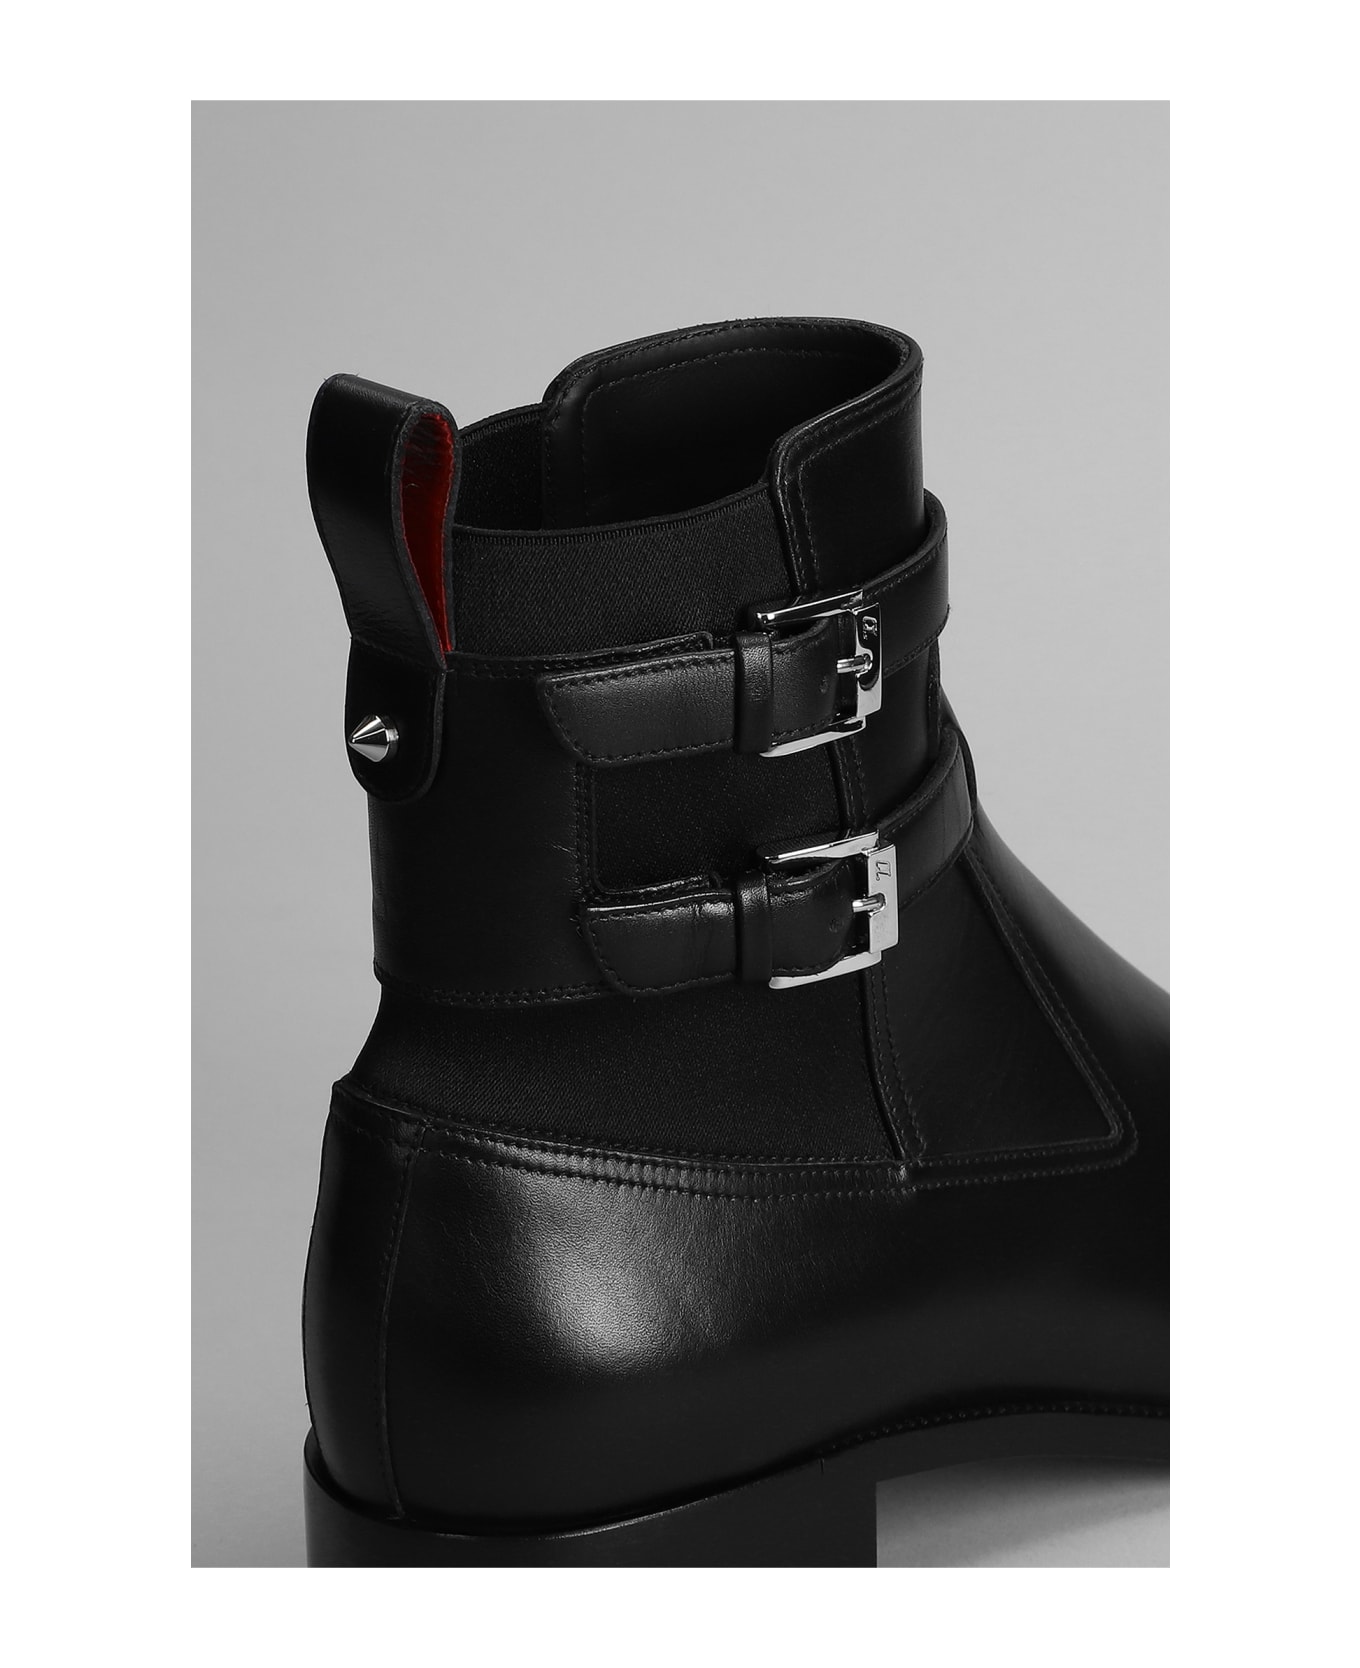 Christian Louboutin Sahni Horse Flat Ankle Boots In Black Leather - black ブーツ